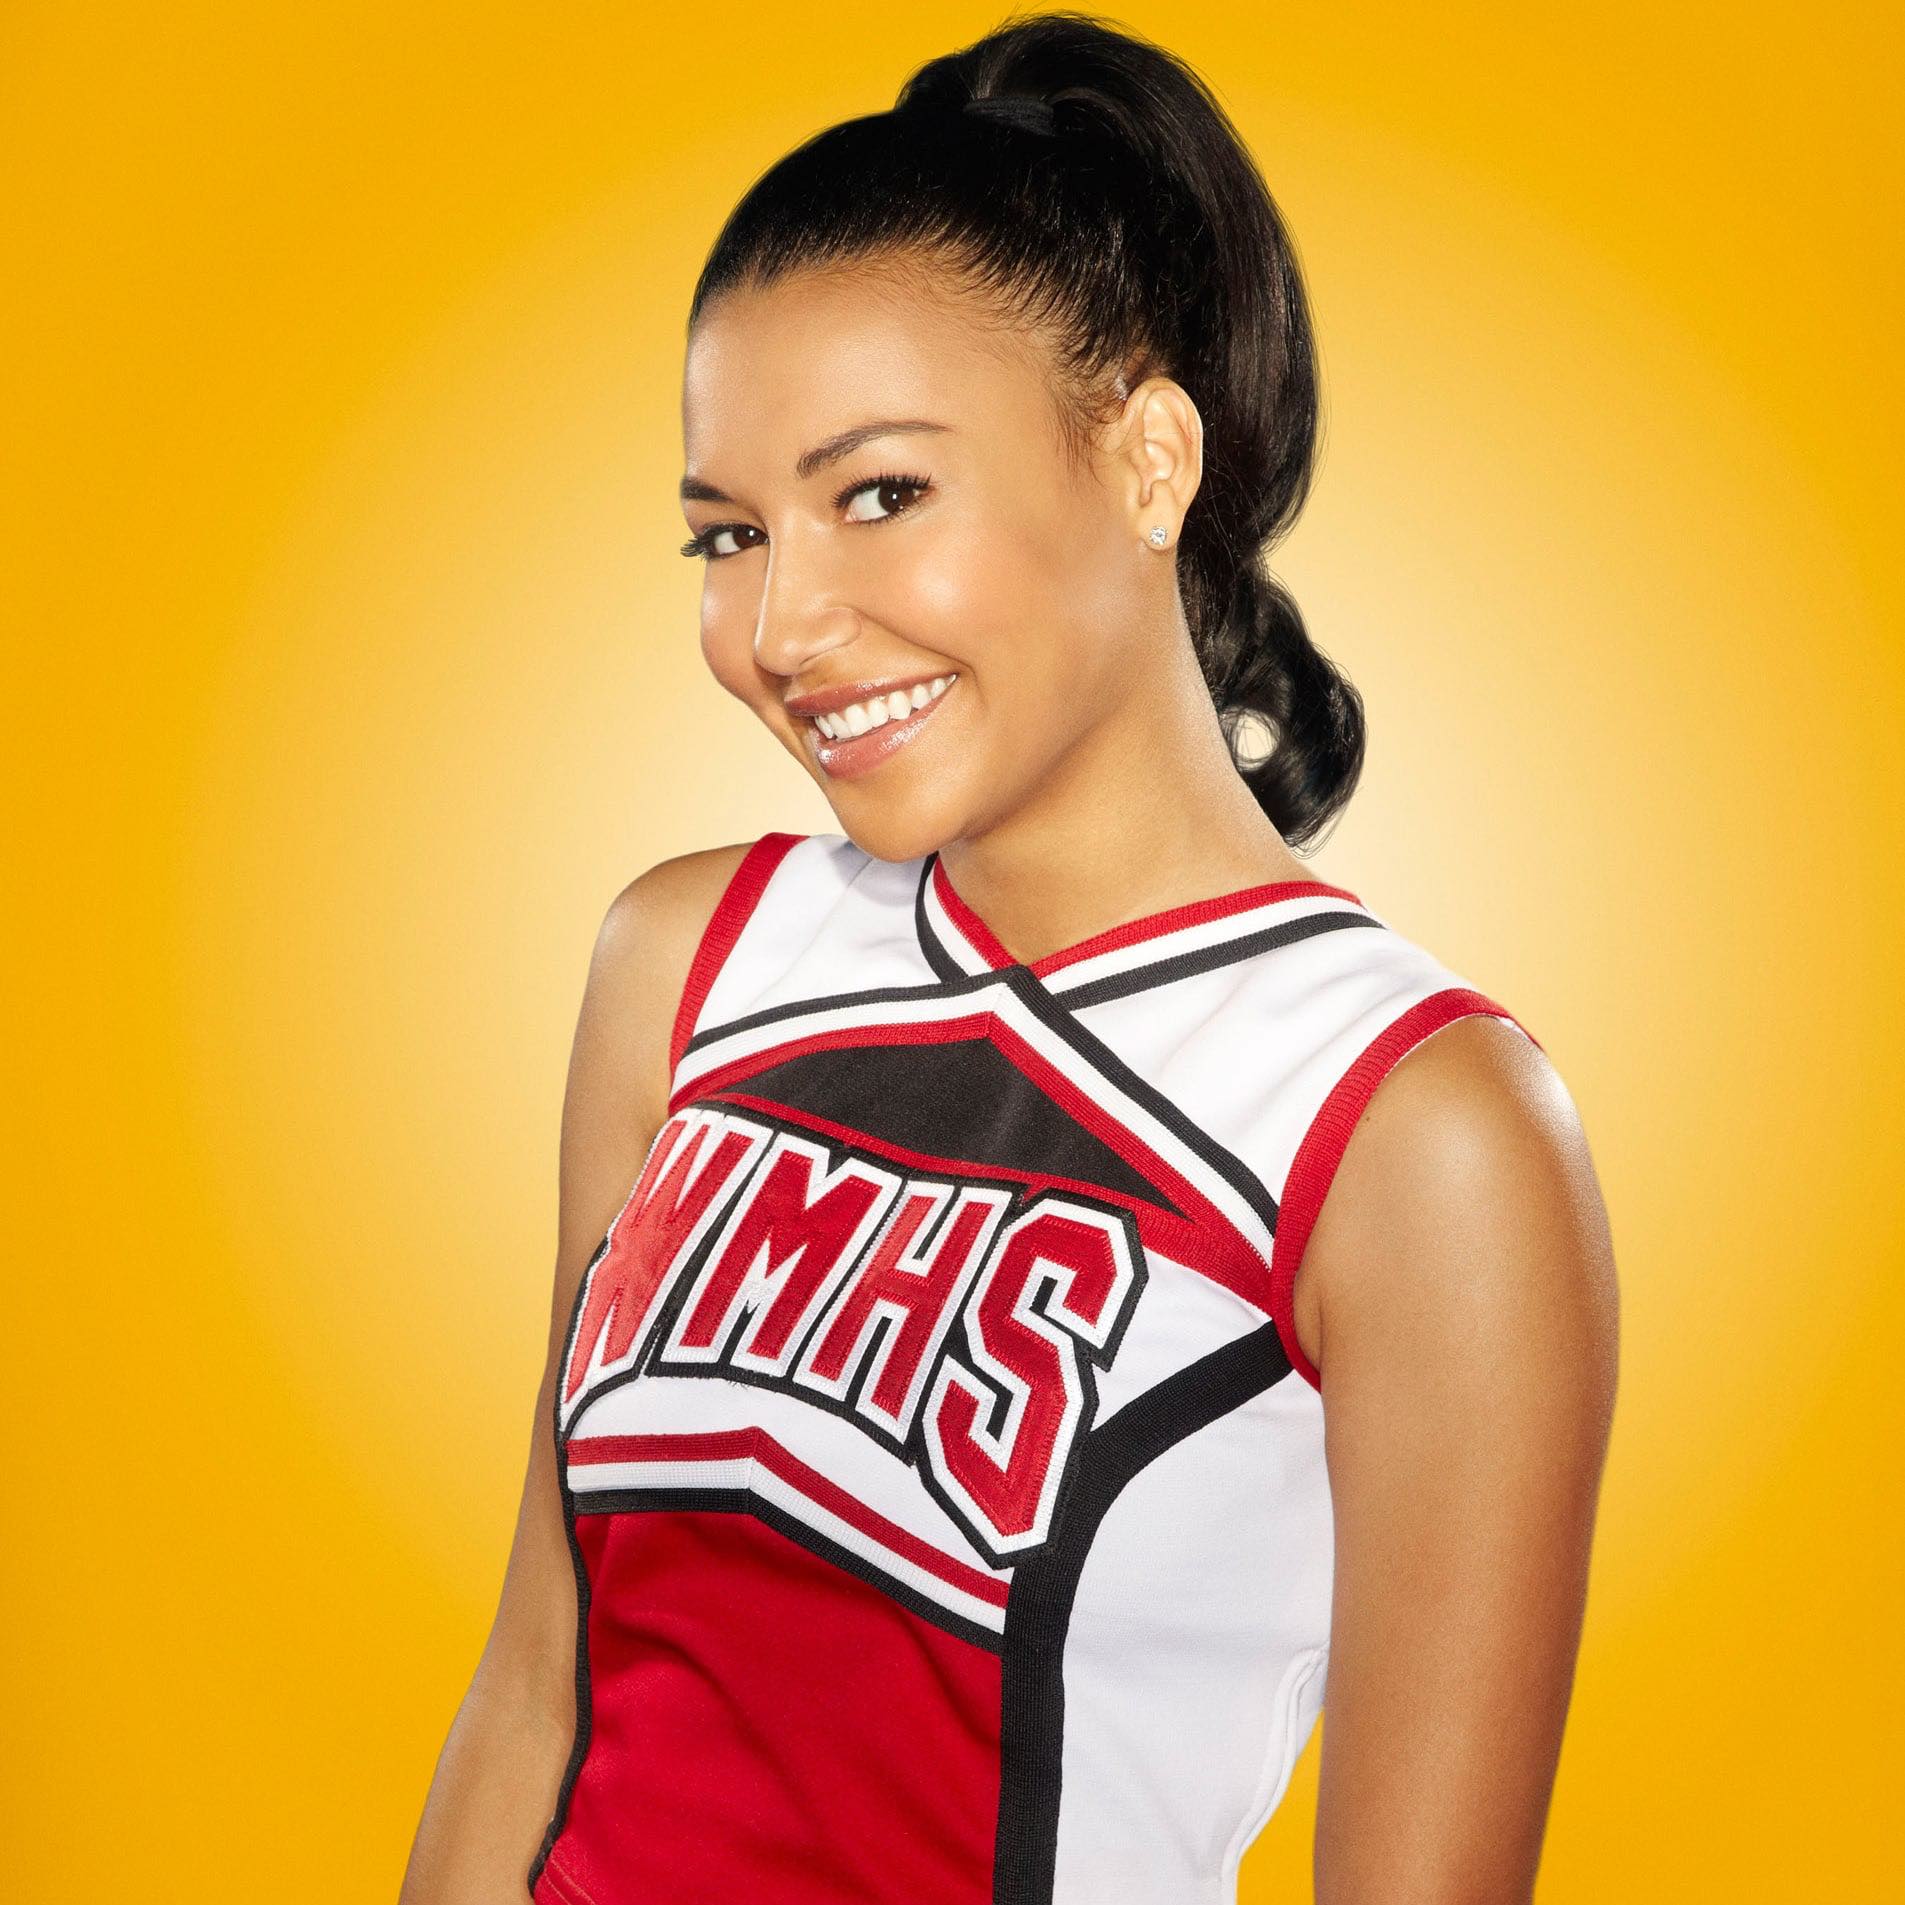 With the recent death of Naya Rivera, theories have been aflying that the entire cast of the Fox comedy 'Glee' are cursed. Let's look at the deaths so far. 